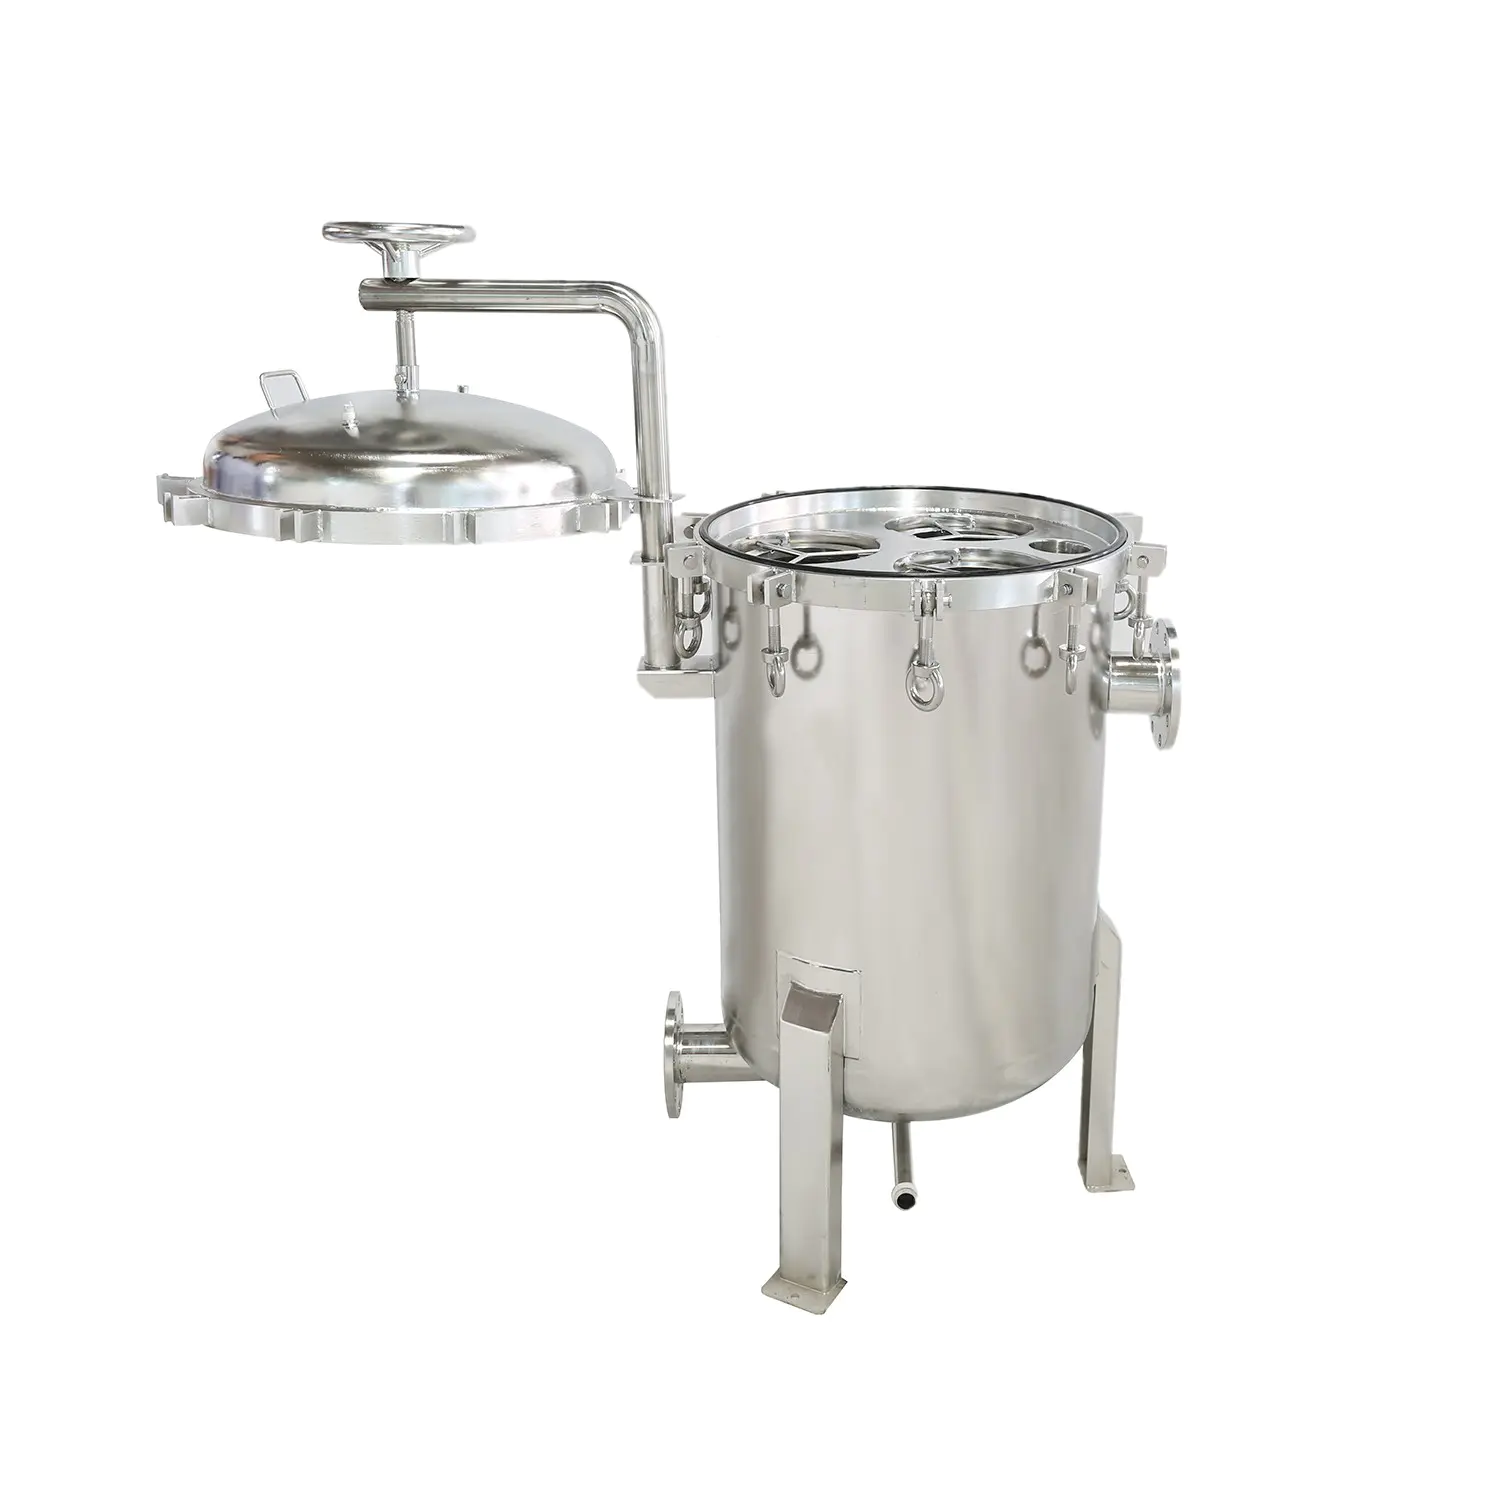 Lvyuan porous ss filter housing with fin end cap for food and beverage